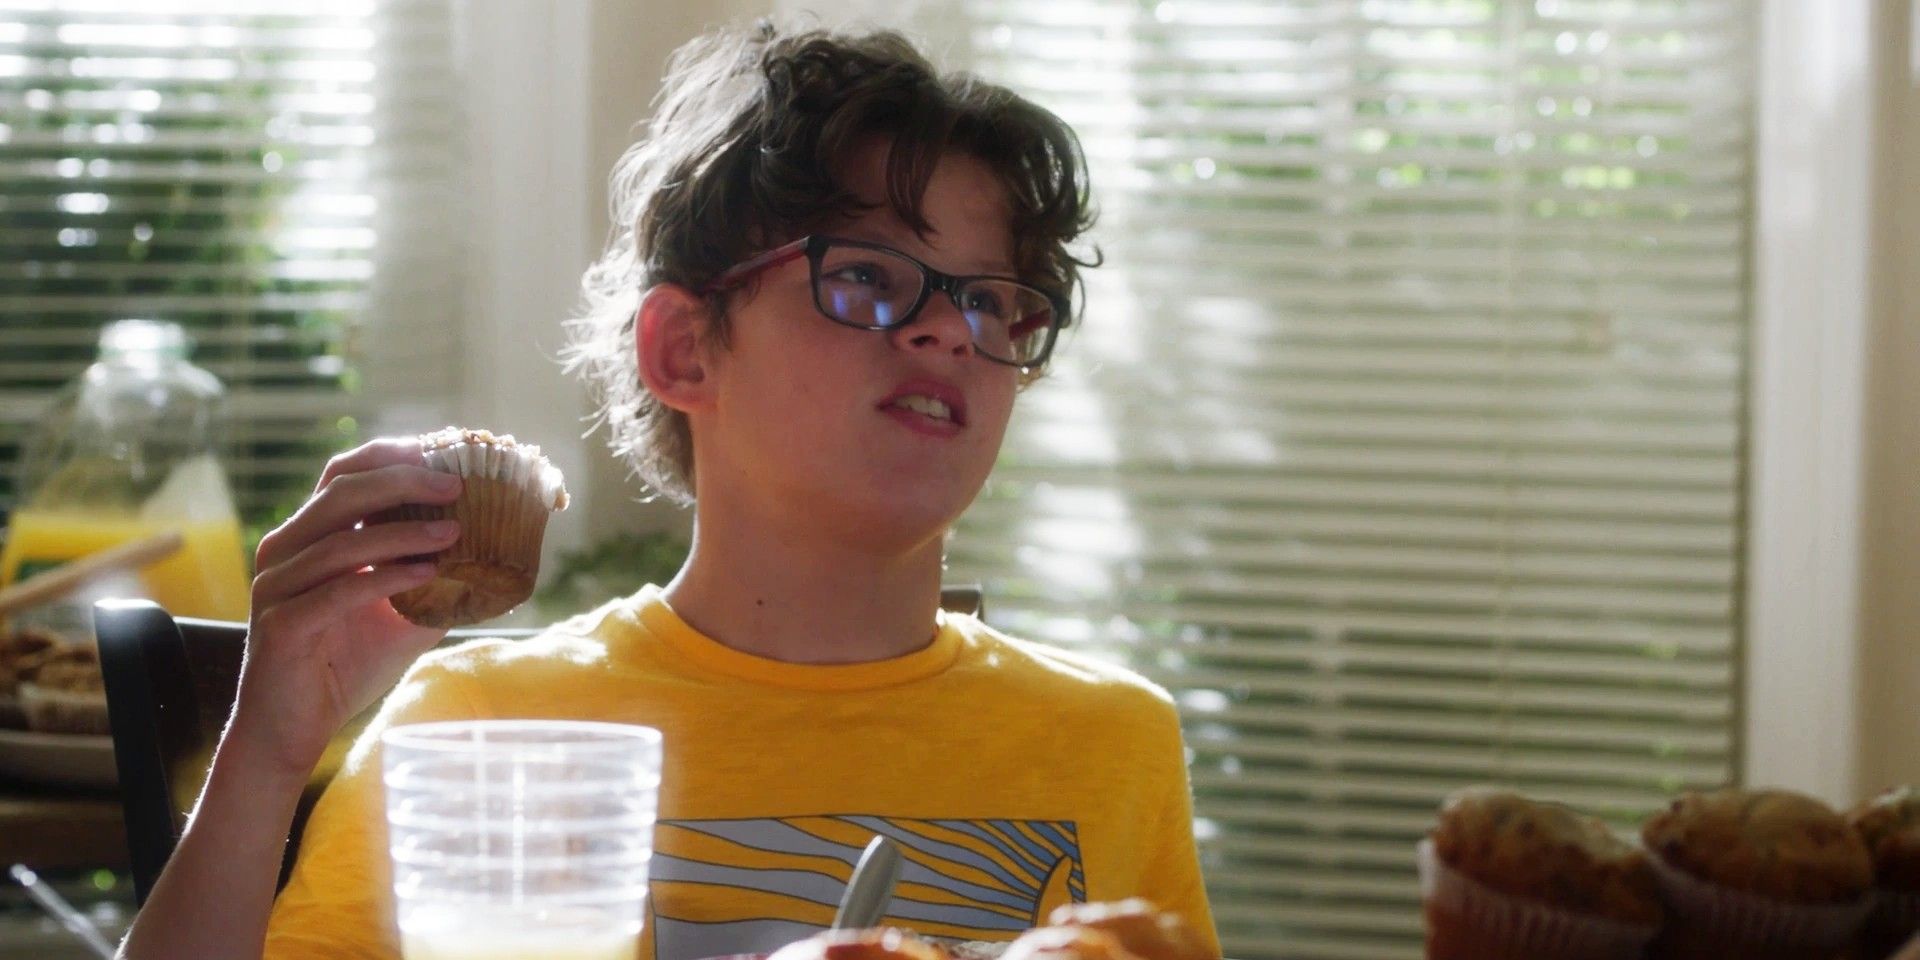 Christopher Diaz (Gavin McHugh) holds muffin at breakfast table in 9-1-1